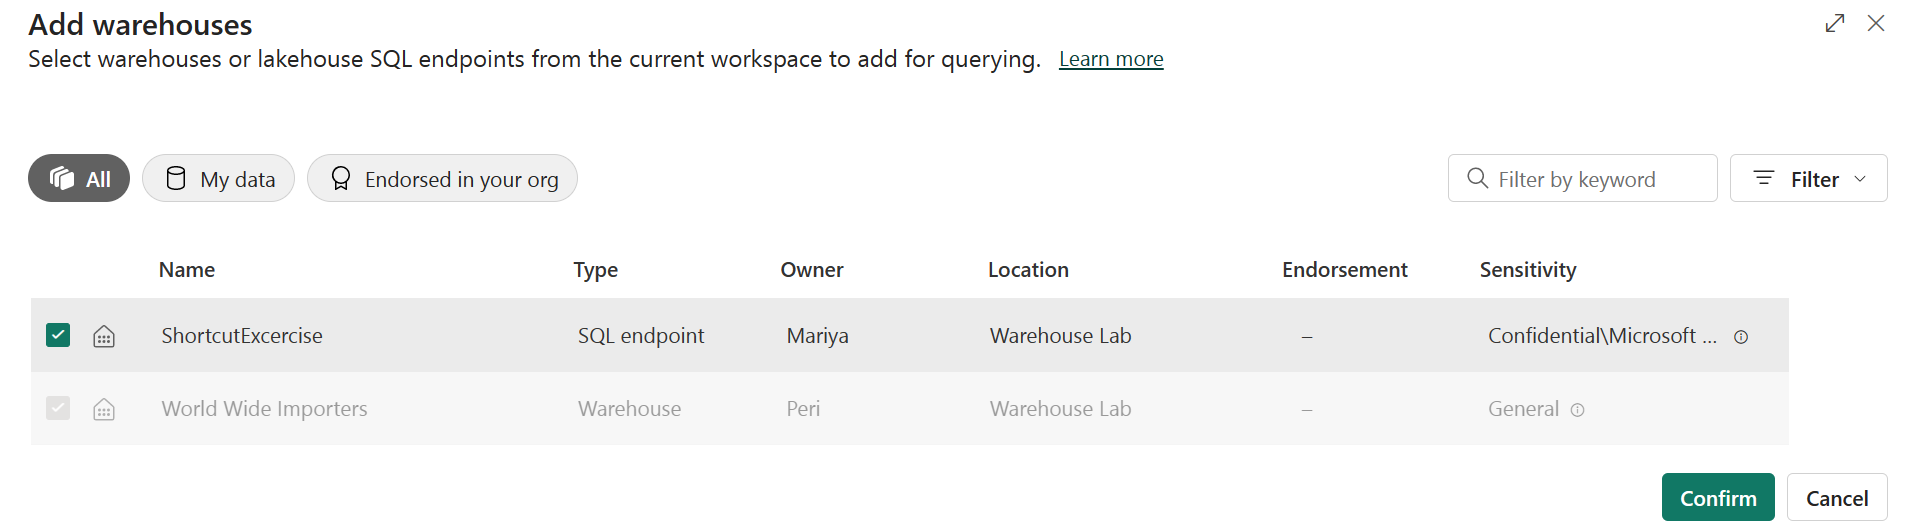 Screenshot from the Fabric portal Add warehouses window. Two warehouses are selected, including the ShortcutExercise SQL analytics endpoint.